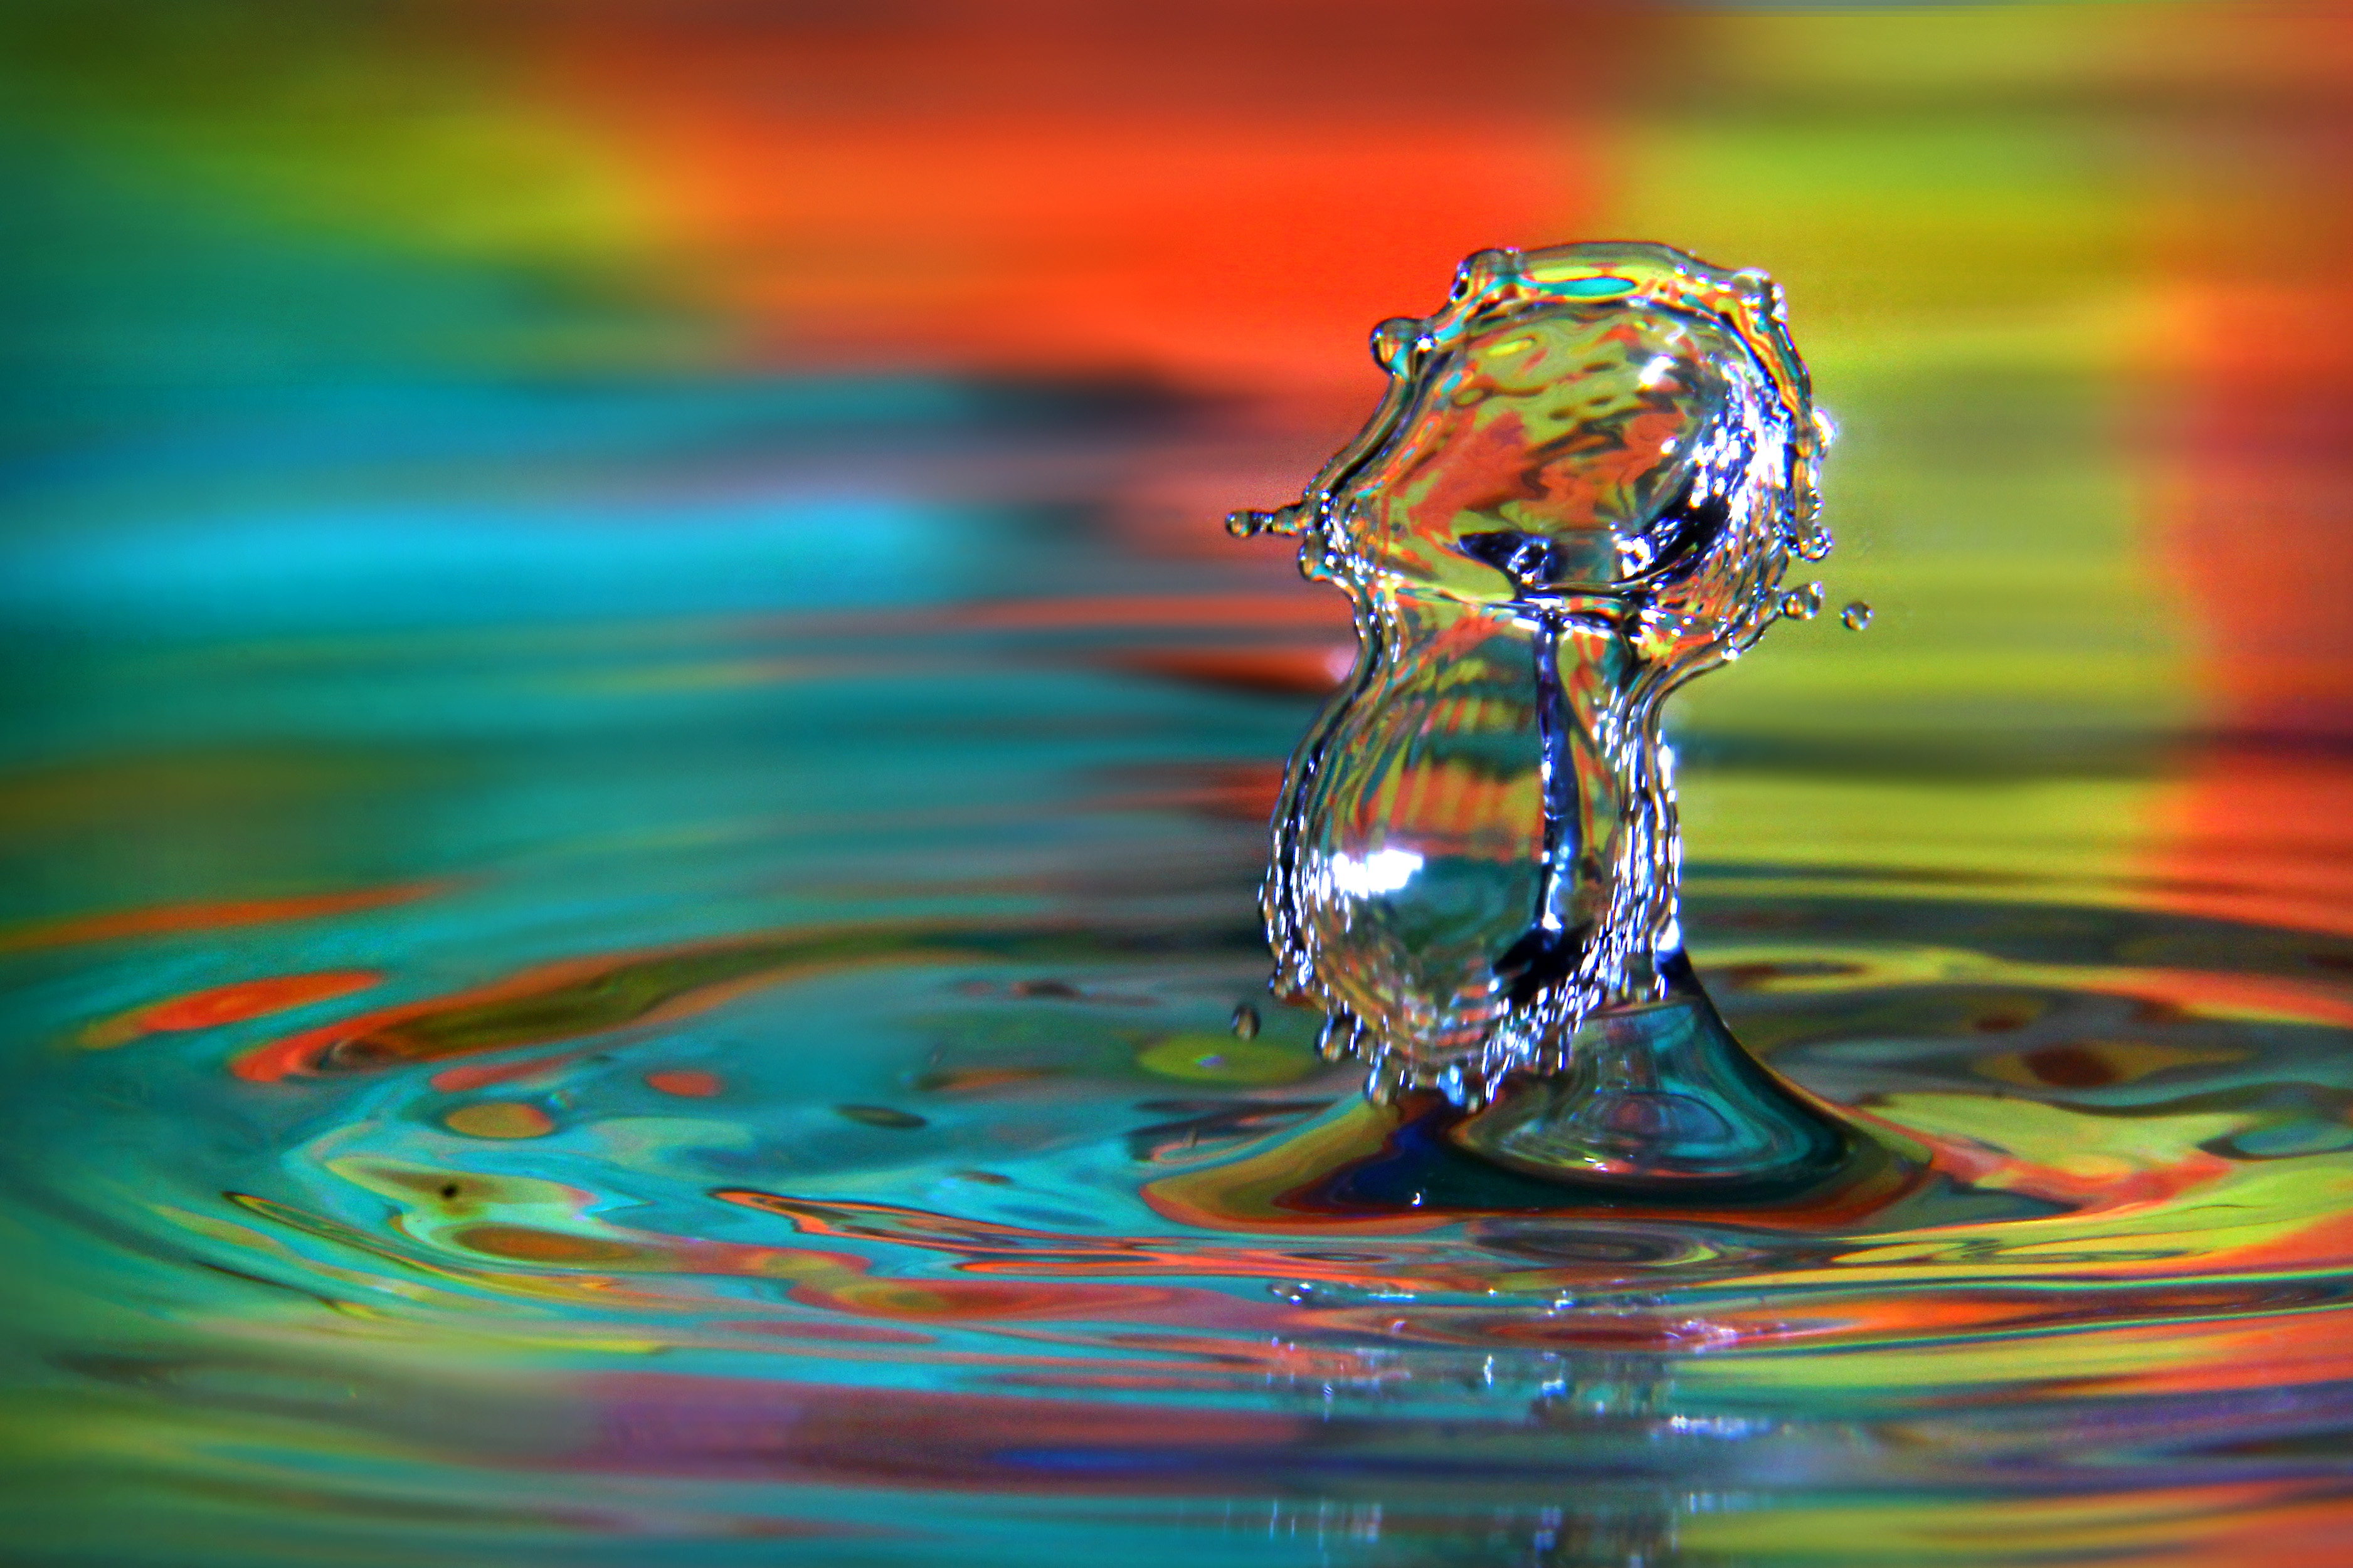 How to Photography: Water Drop Collision | Megan Kelly Photodesign